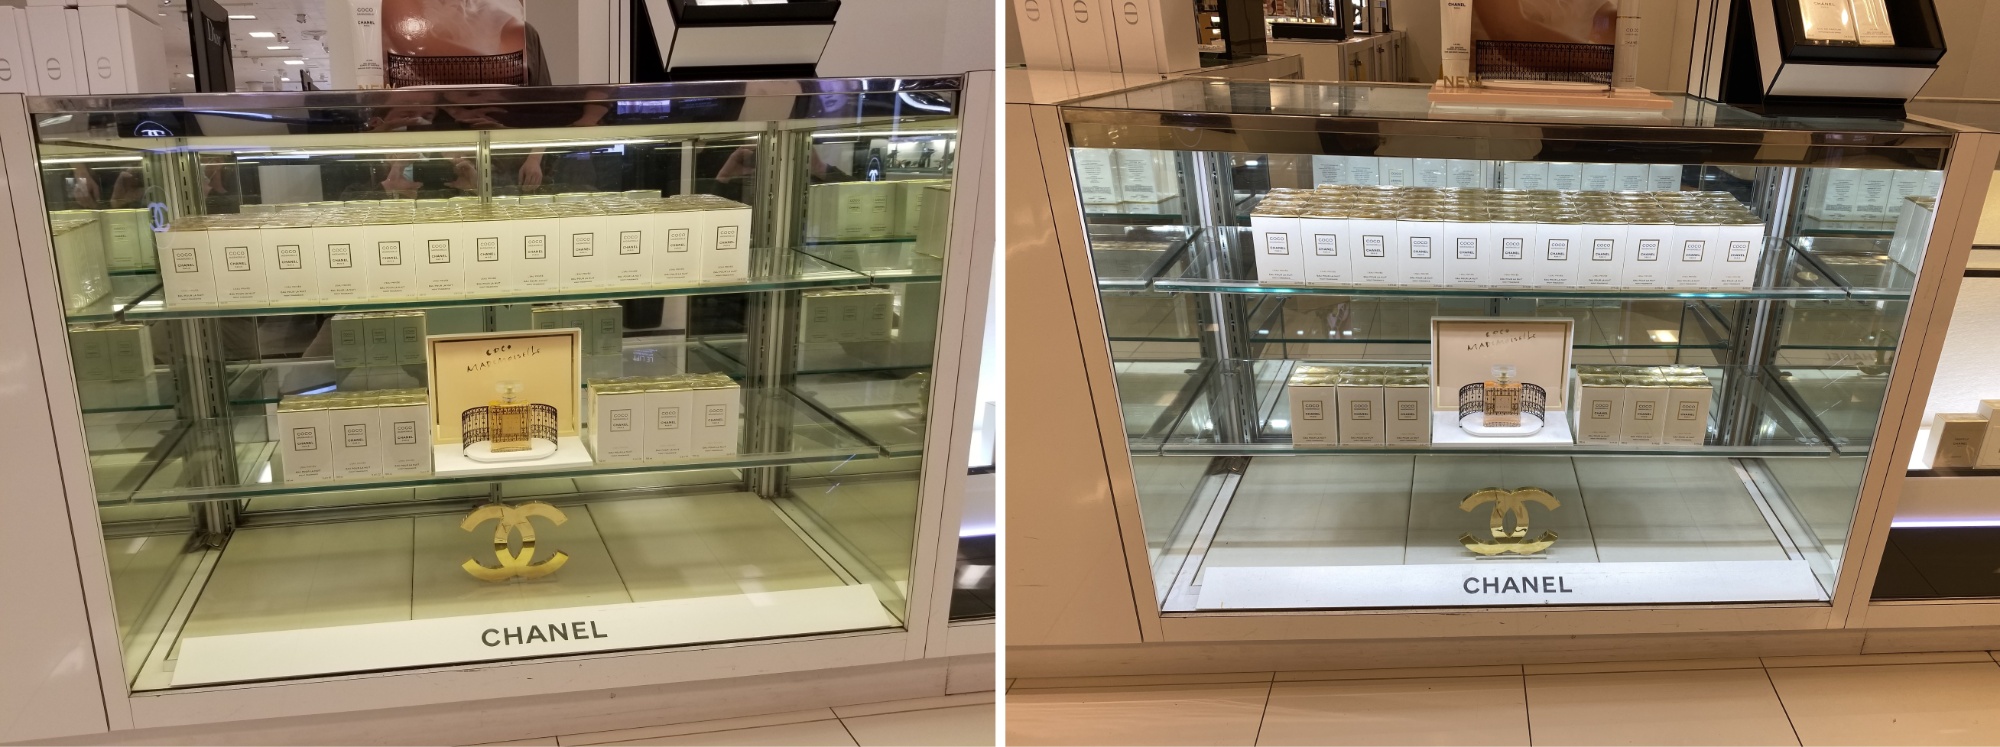 Display case lighting installation - commercial LED contractors WIsconsin